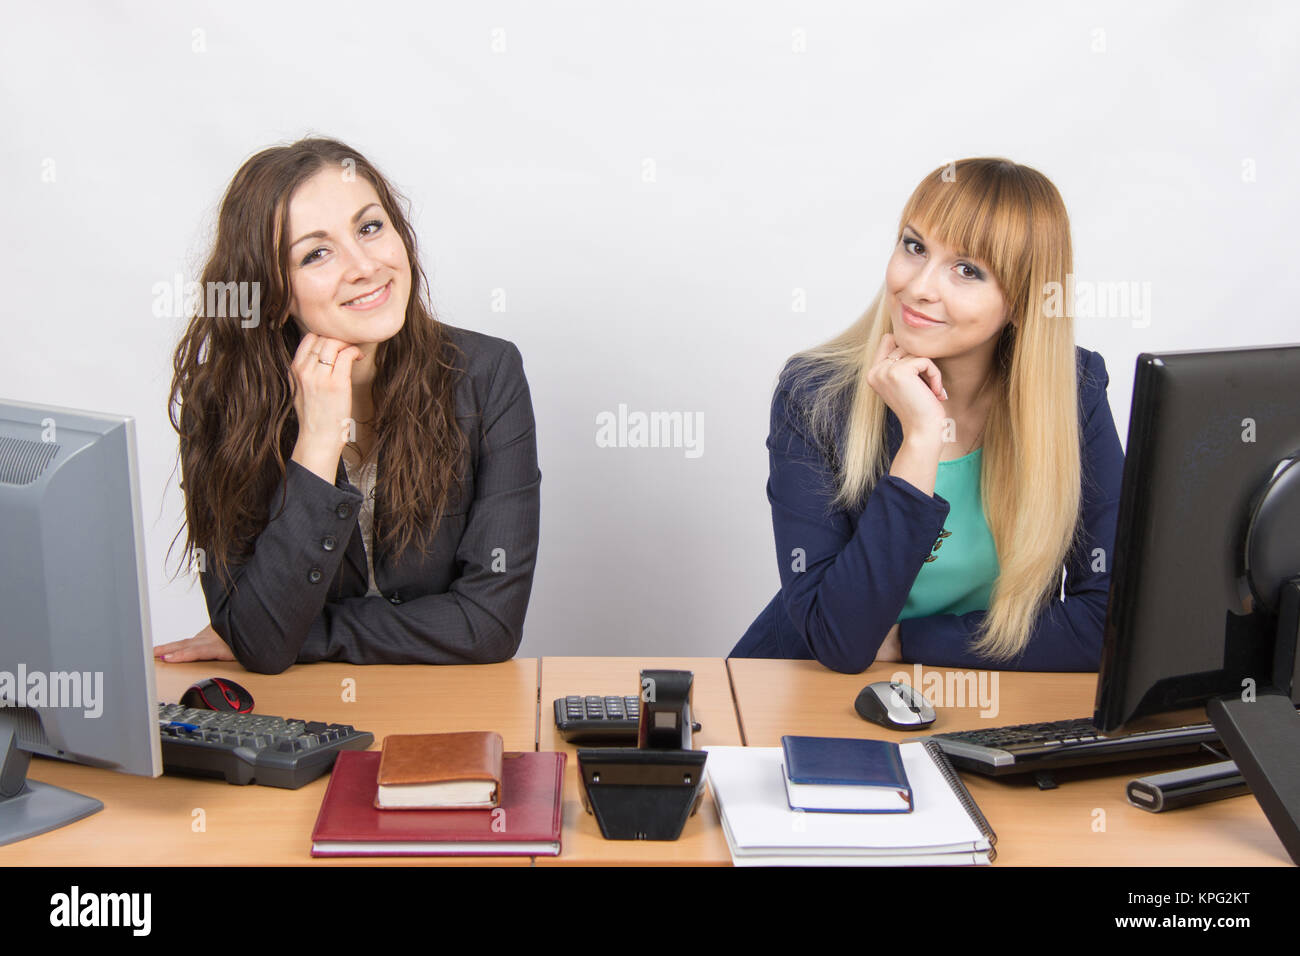 Two young girls newly recruited developing are in the workplace Stock Photo